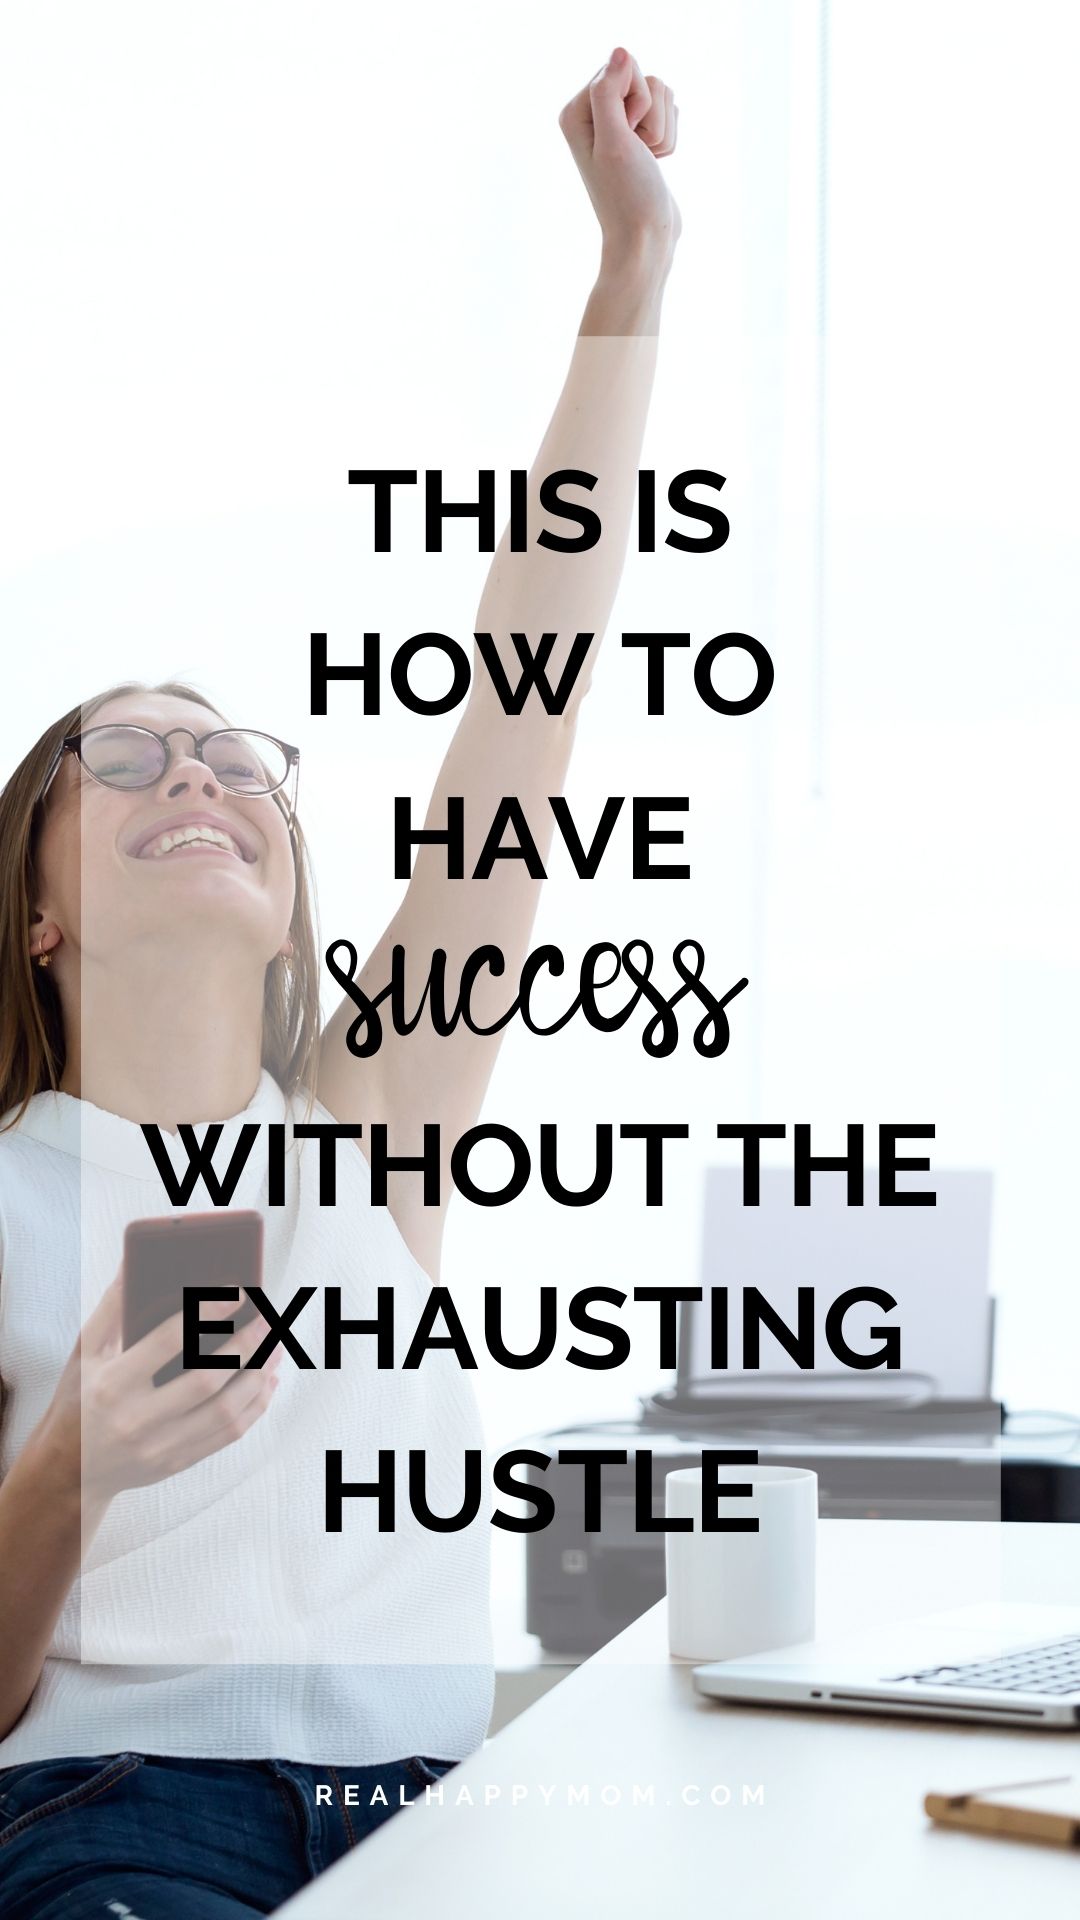 This is How to Have Success Without the Exhausting Hustle